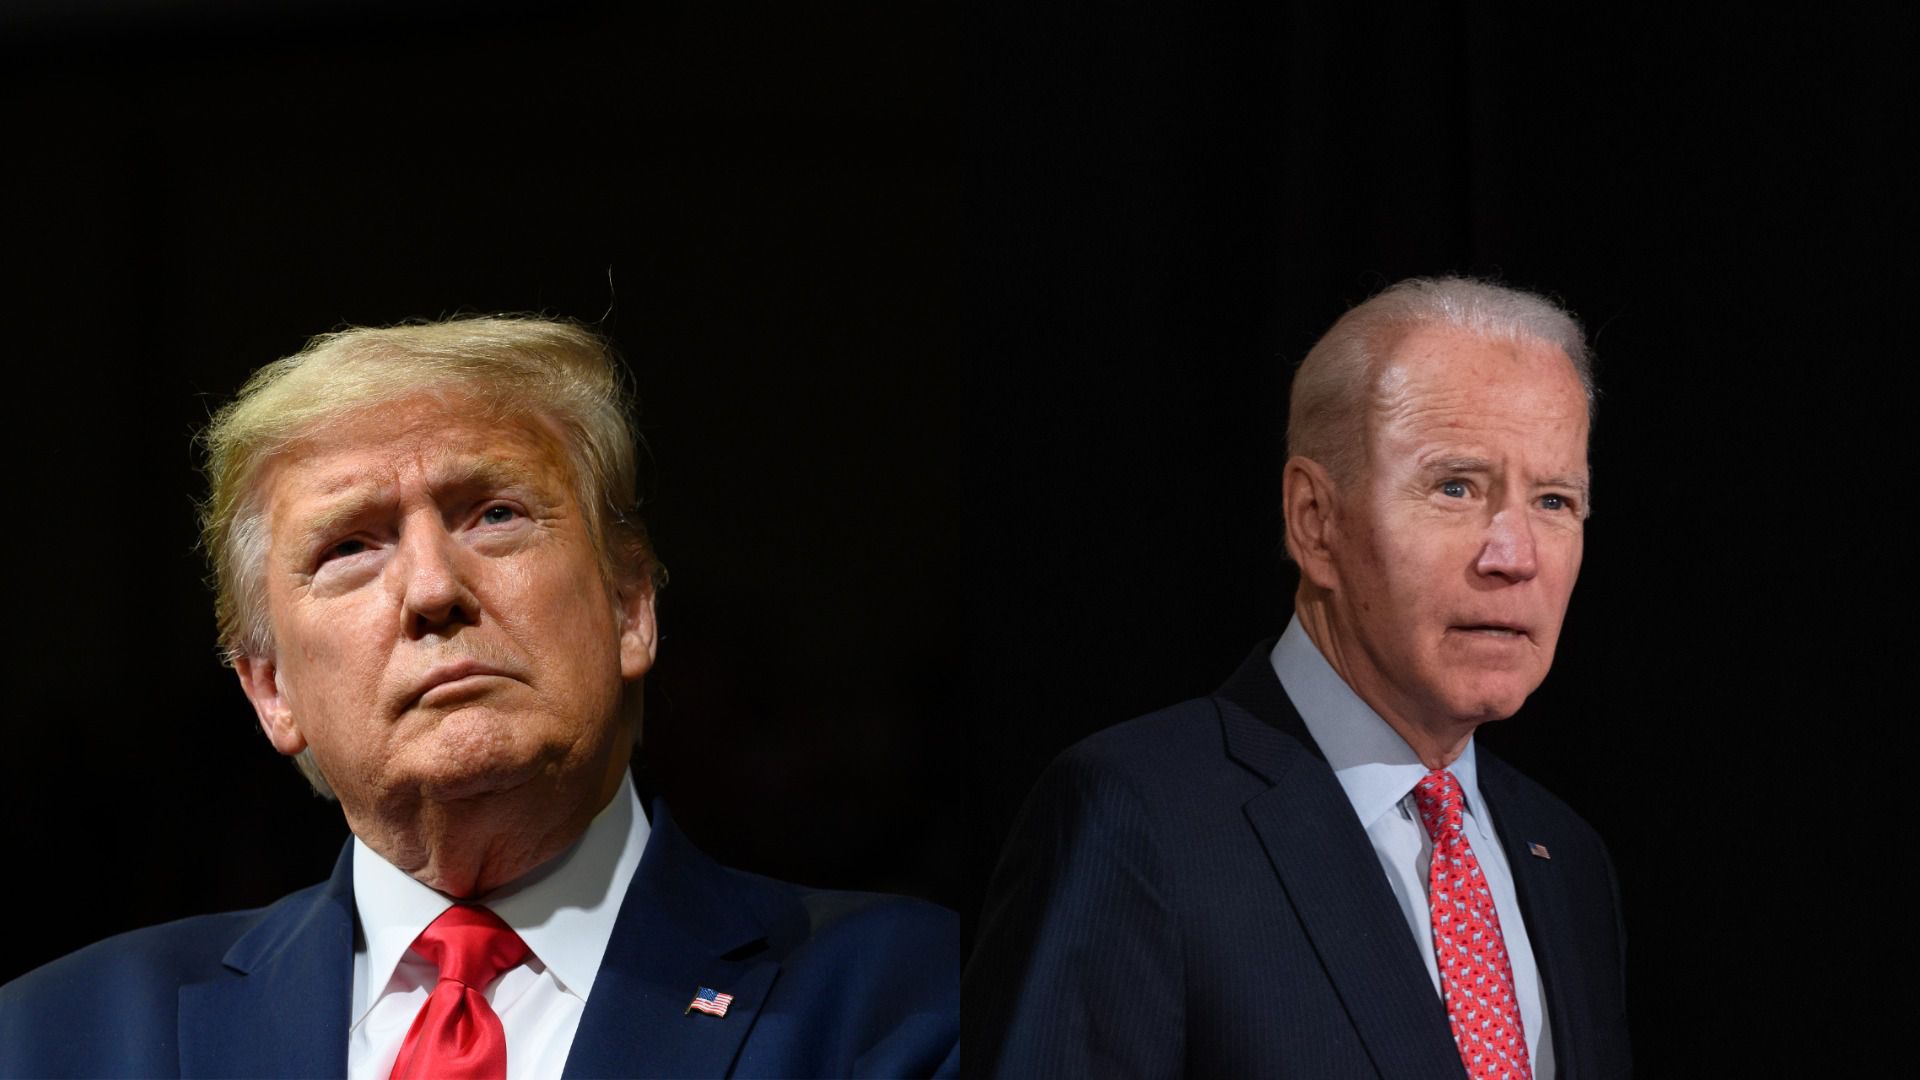 Trump pulls tighter with Biden in nationwide polling